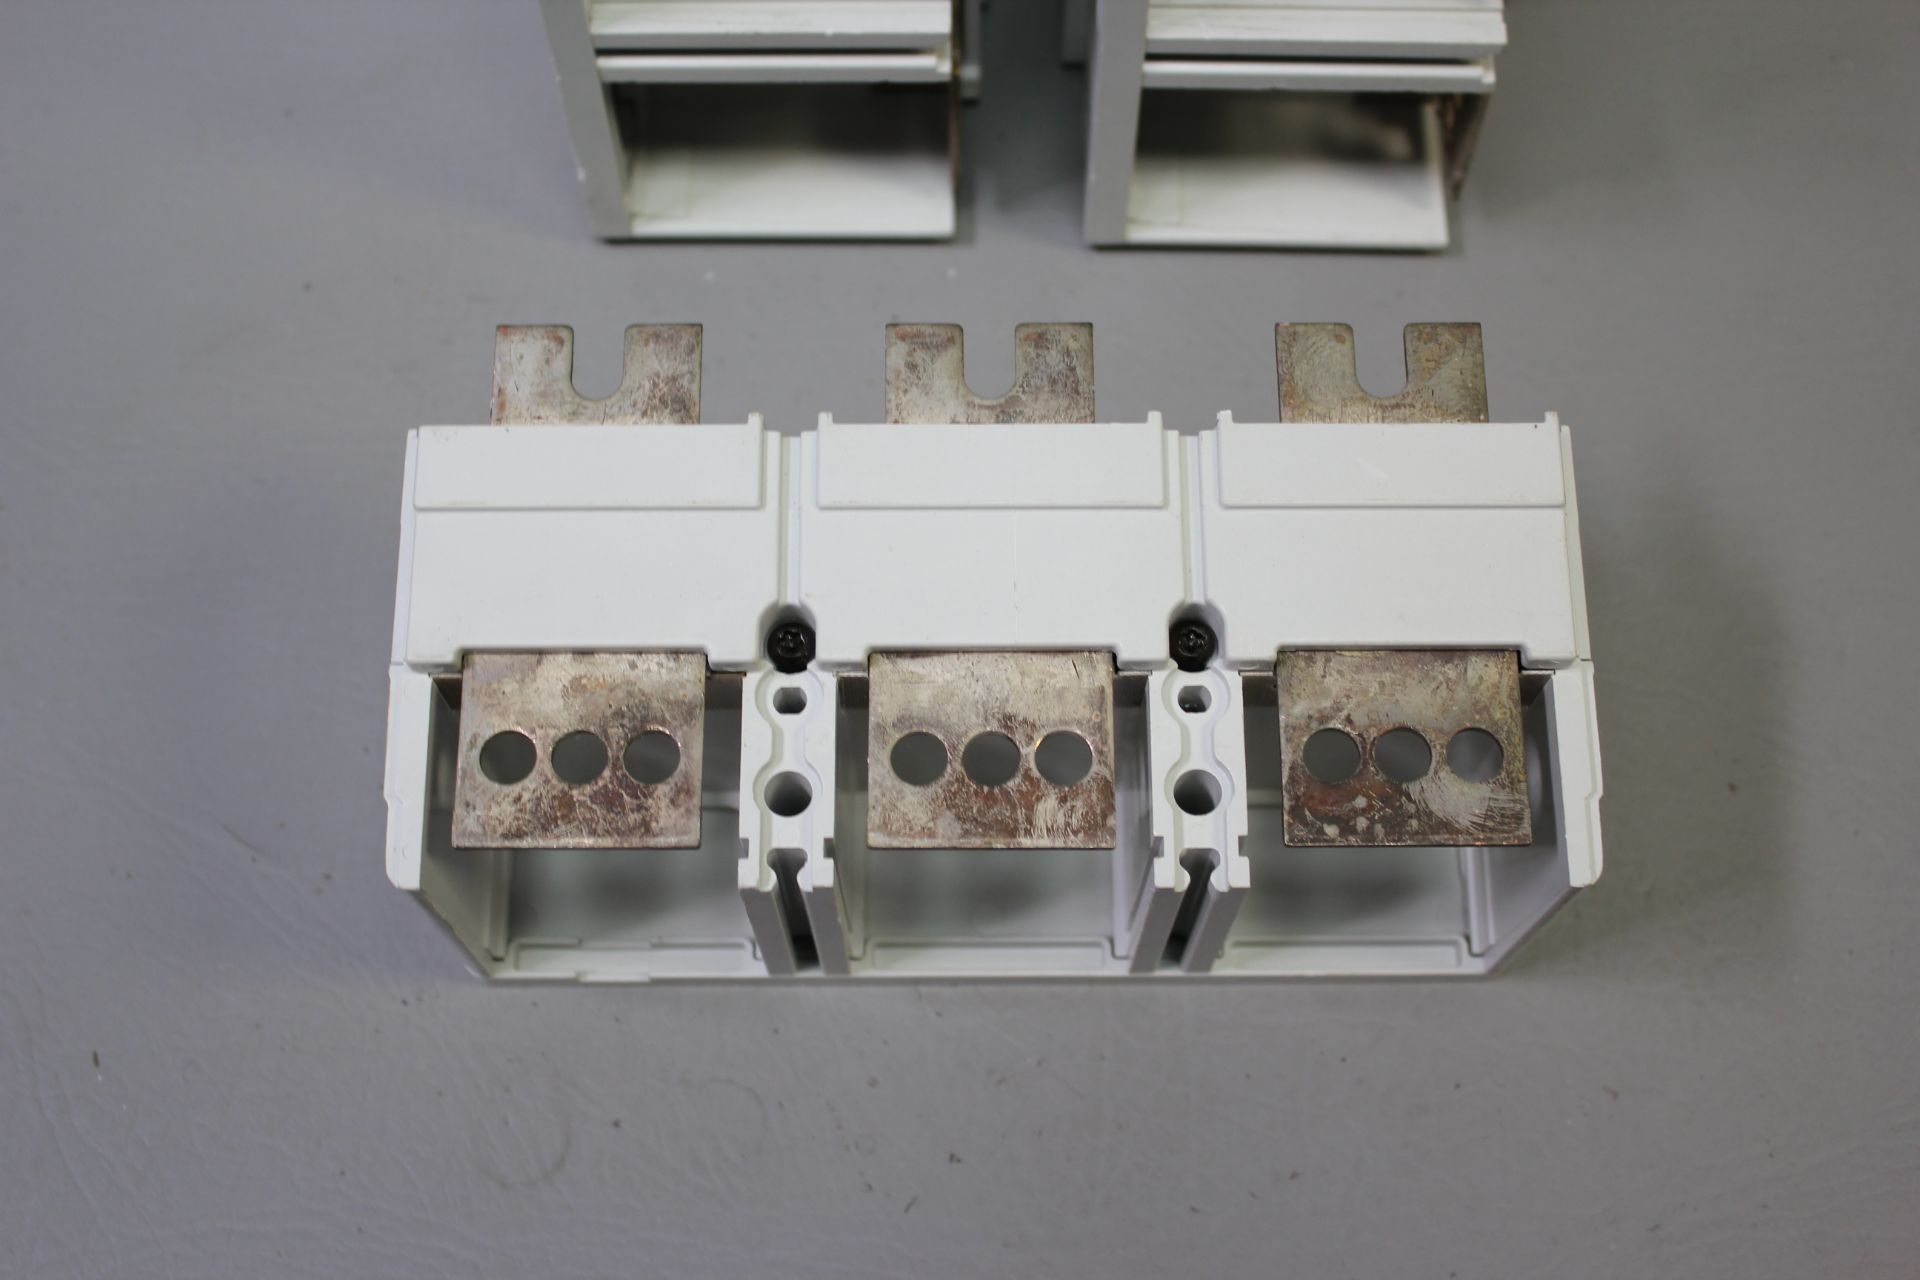 3 SIEMENS THERMAL MAGNETIC 3 POLE LINE PROTECTORS - Image 5 of 5